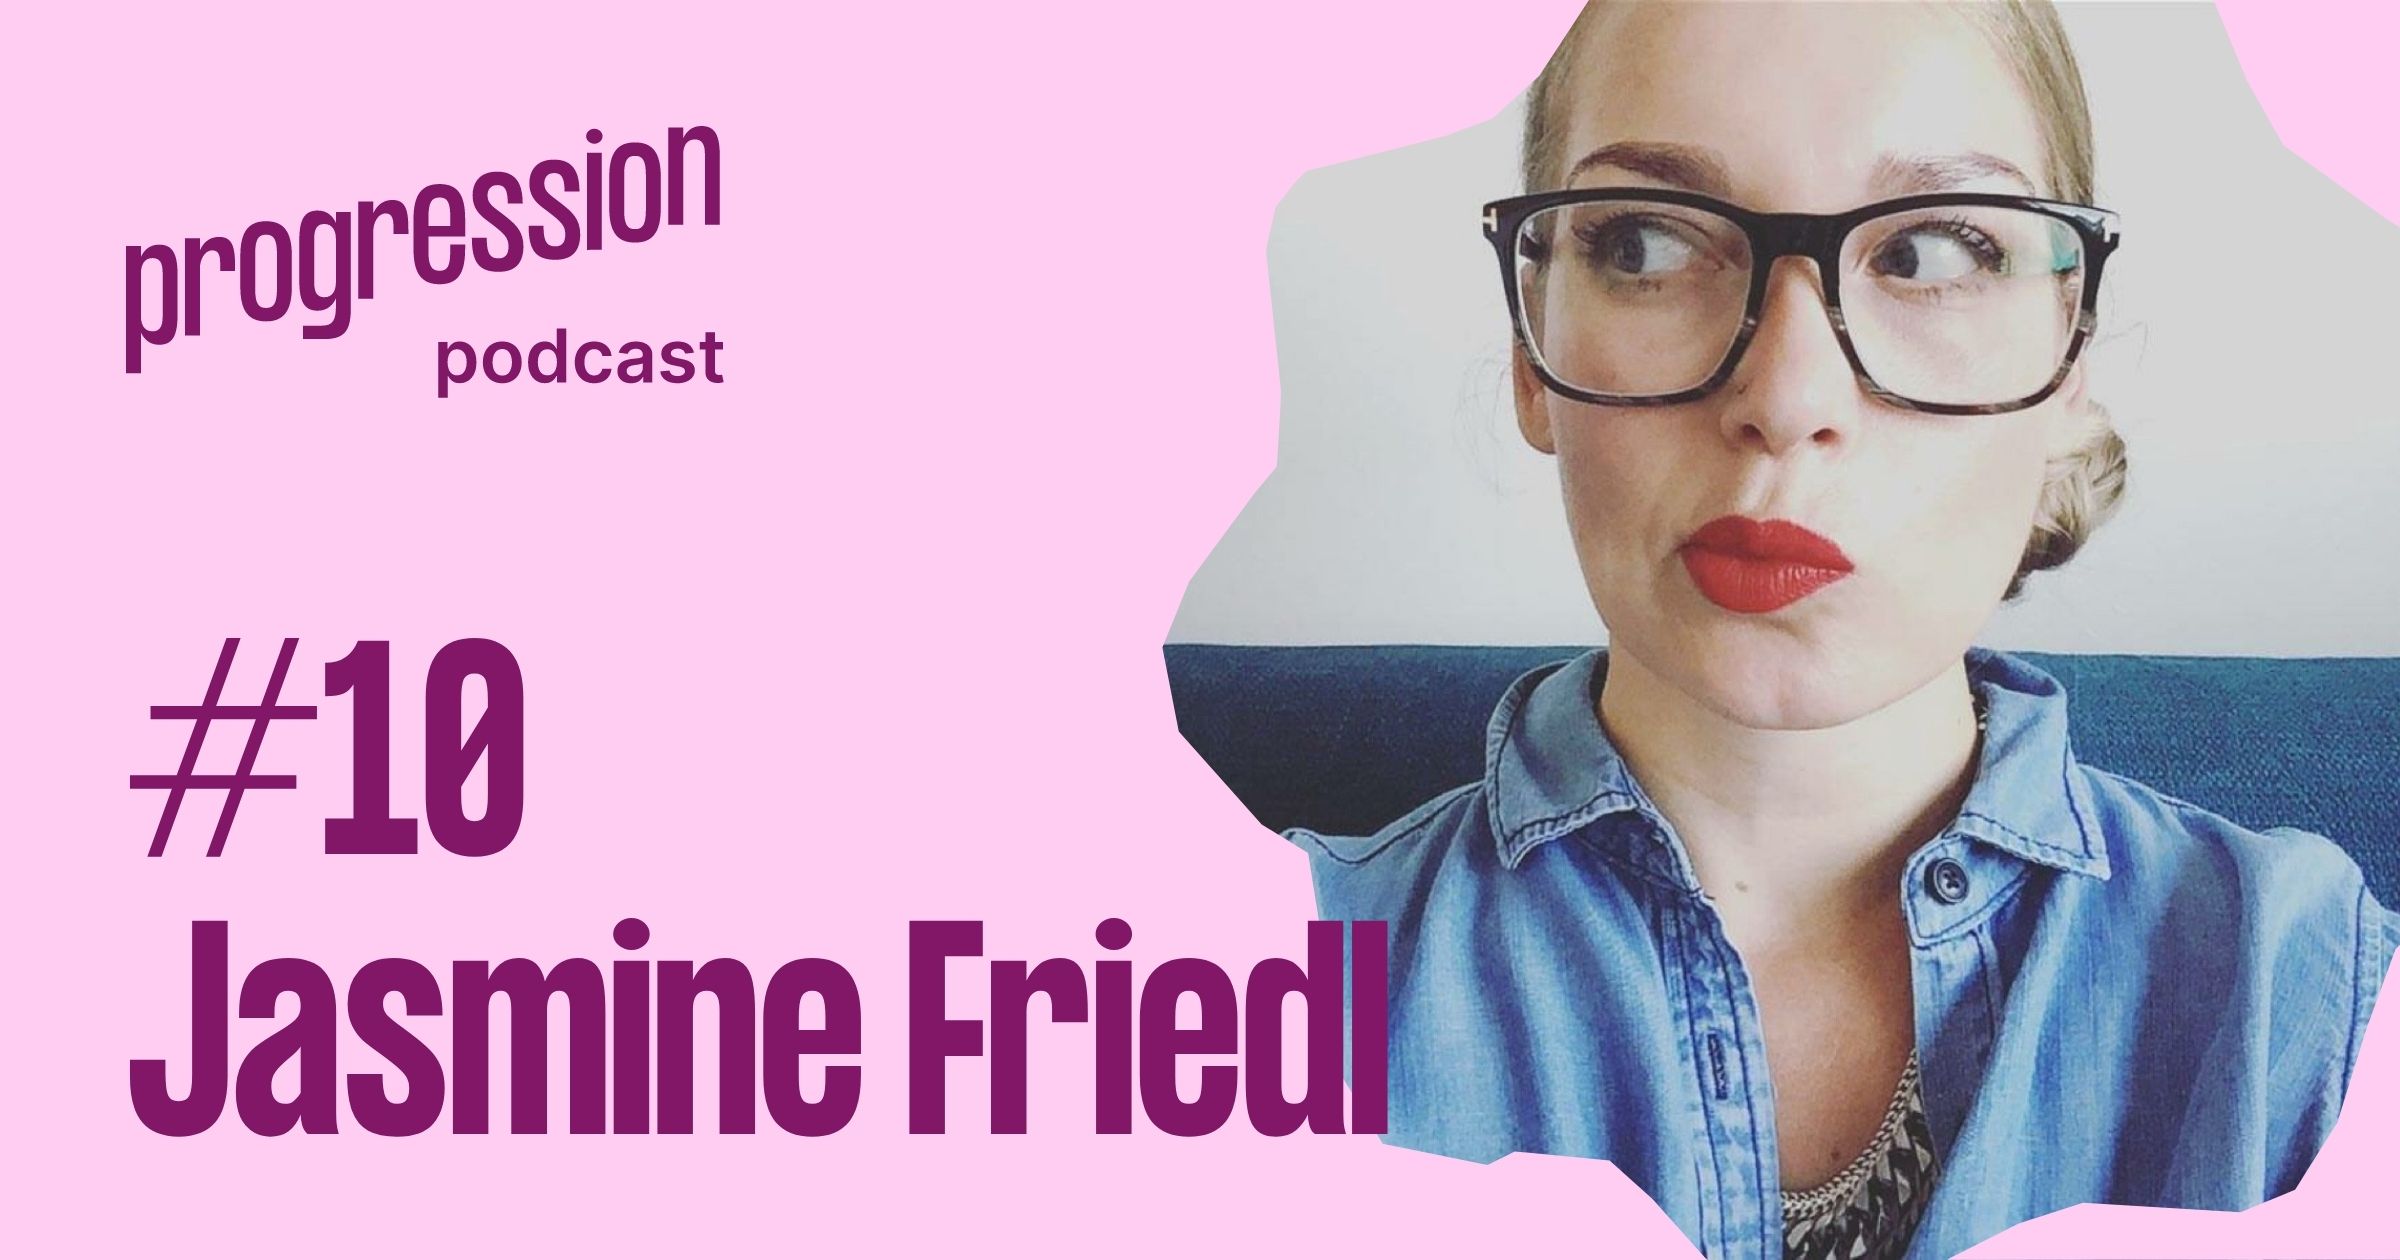 Podcast #10: Jasmine Friedl (Intercom) on having a deliberate career and overcoming challenges